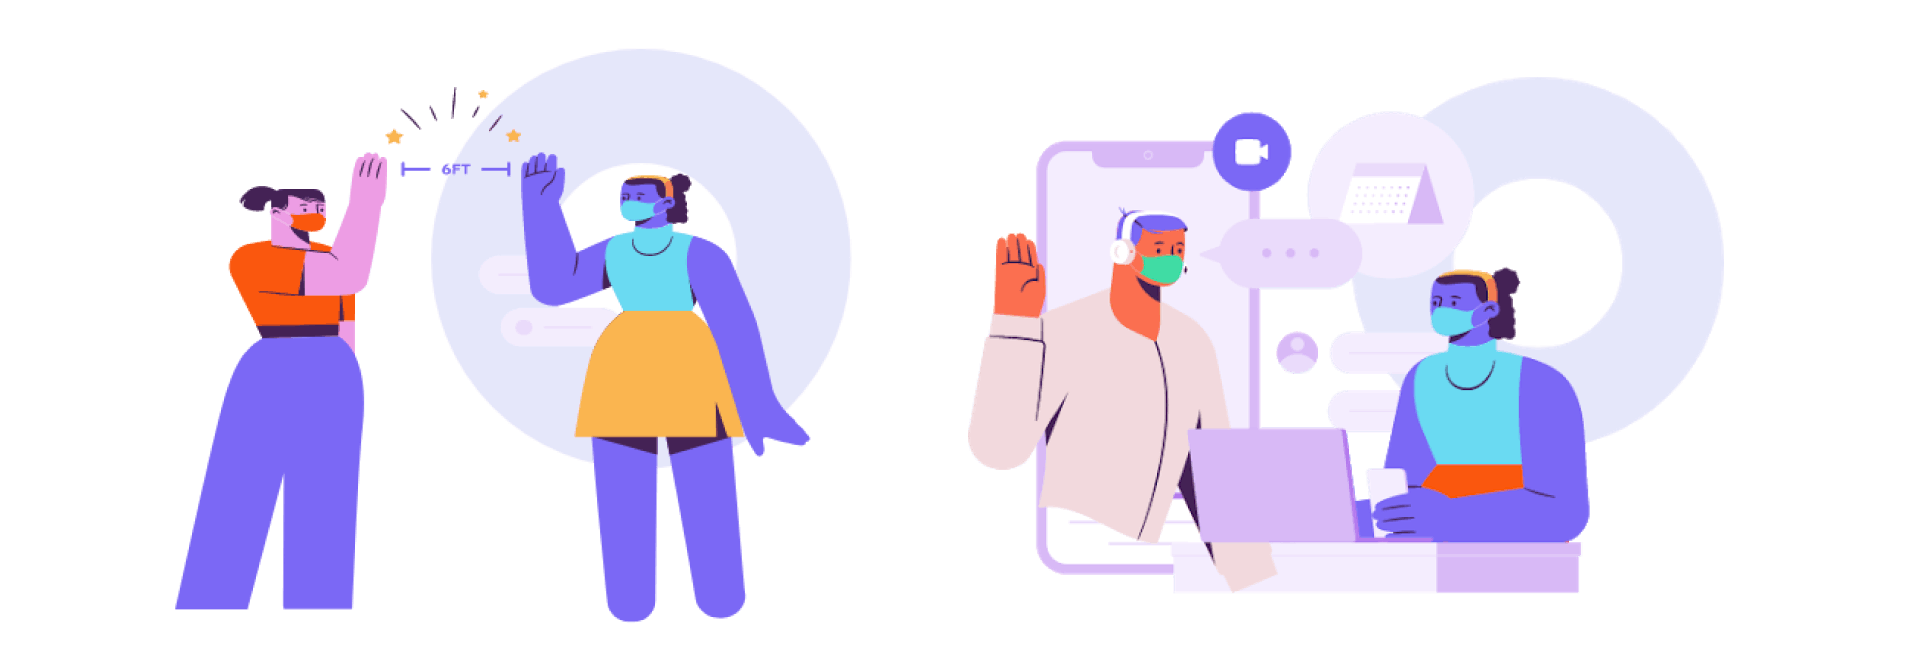 Two illustrations side by side. In the first, two female presenting people putting their hands up for a high-five 6ft away wearing masks. In the second, a orange male-presenting person is framed by a phone with a speech bubble and a female-presenting person sitting at a laptop